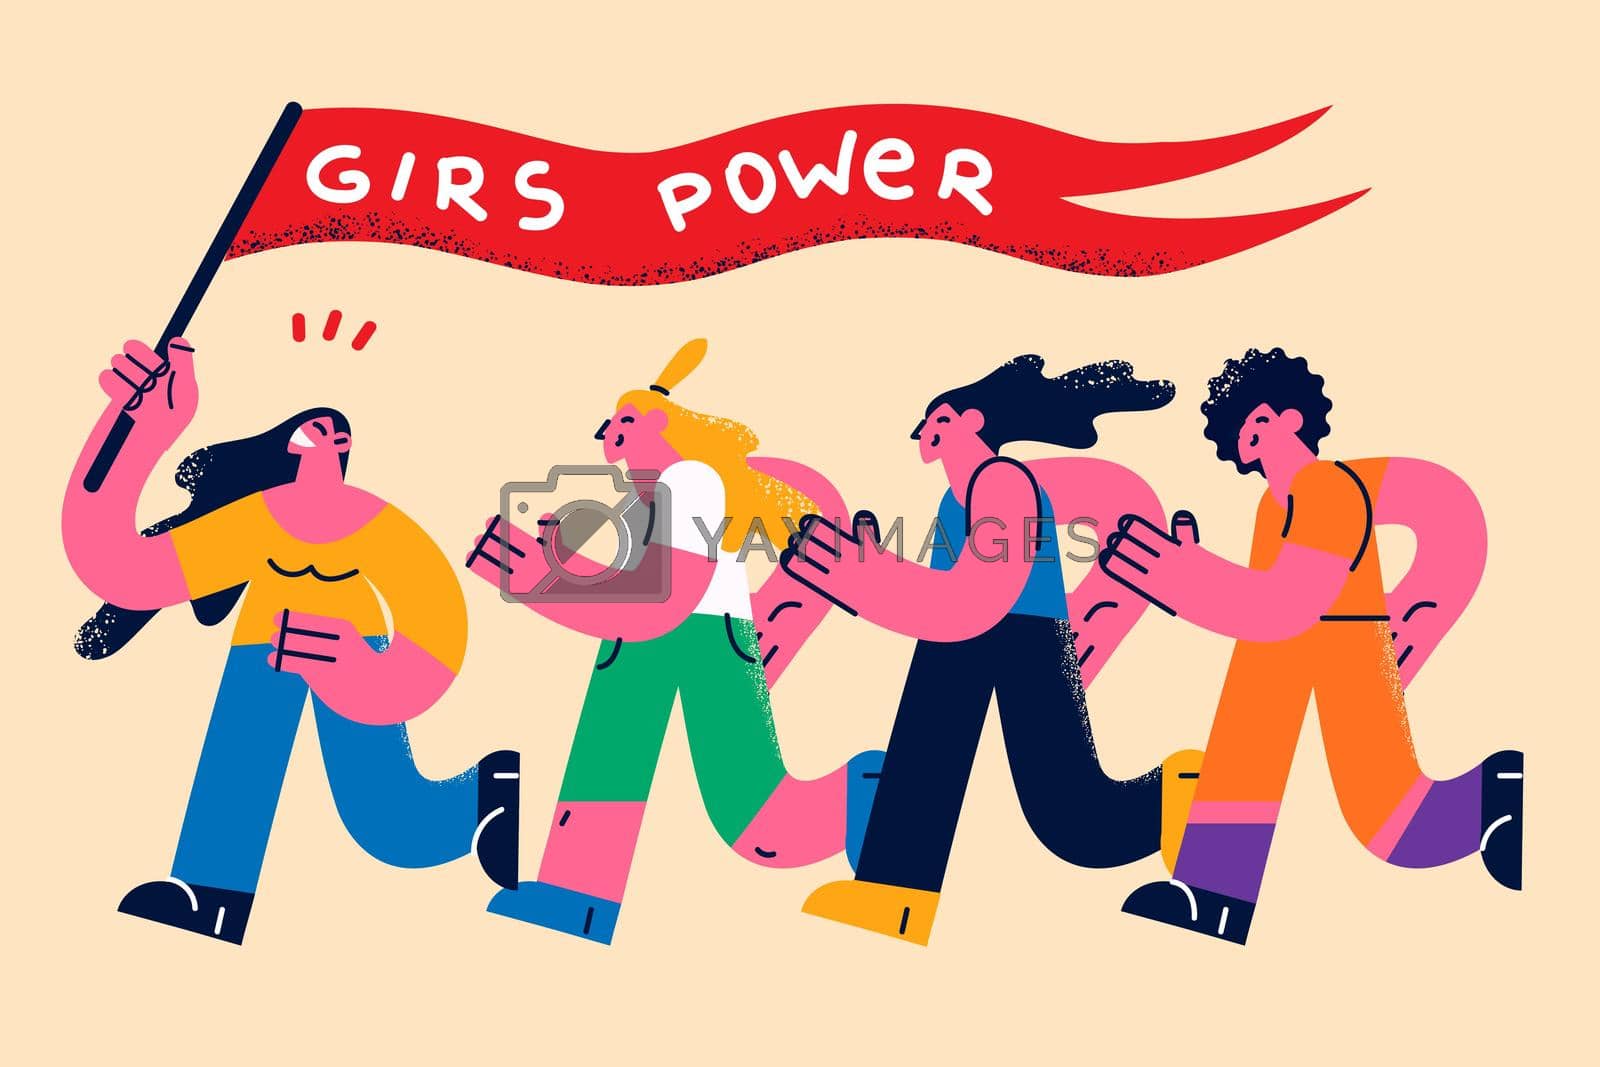 Feminism, women rights and power concept. Group of young girls friends running smiling holding flag with girls power lettering feeling confident vector illustration